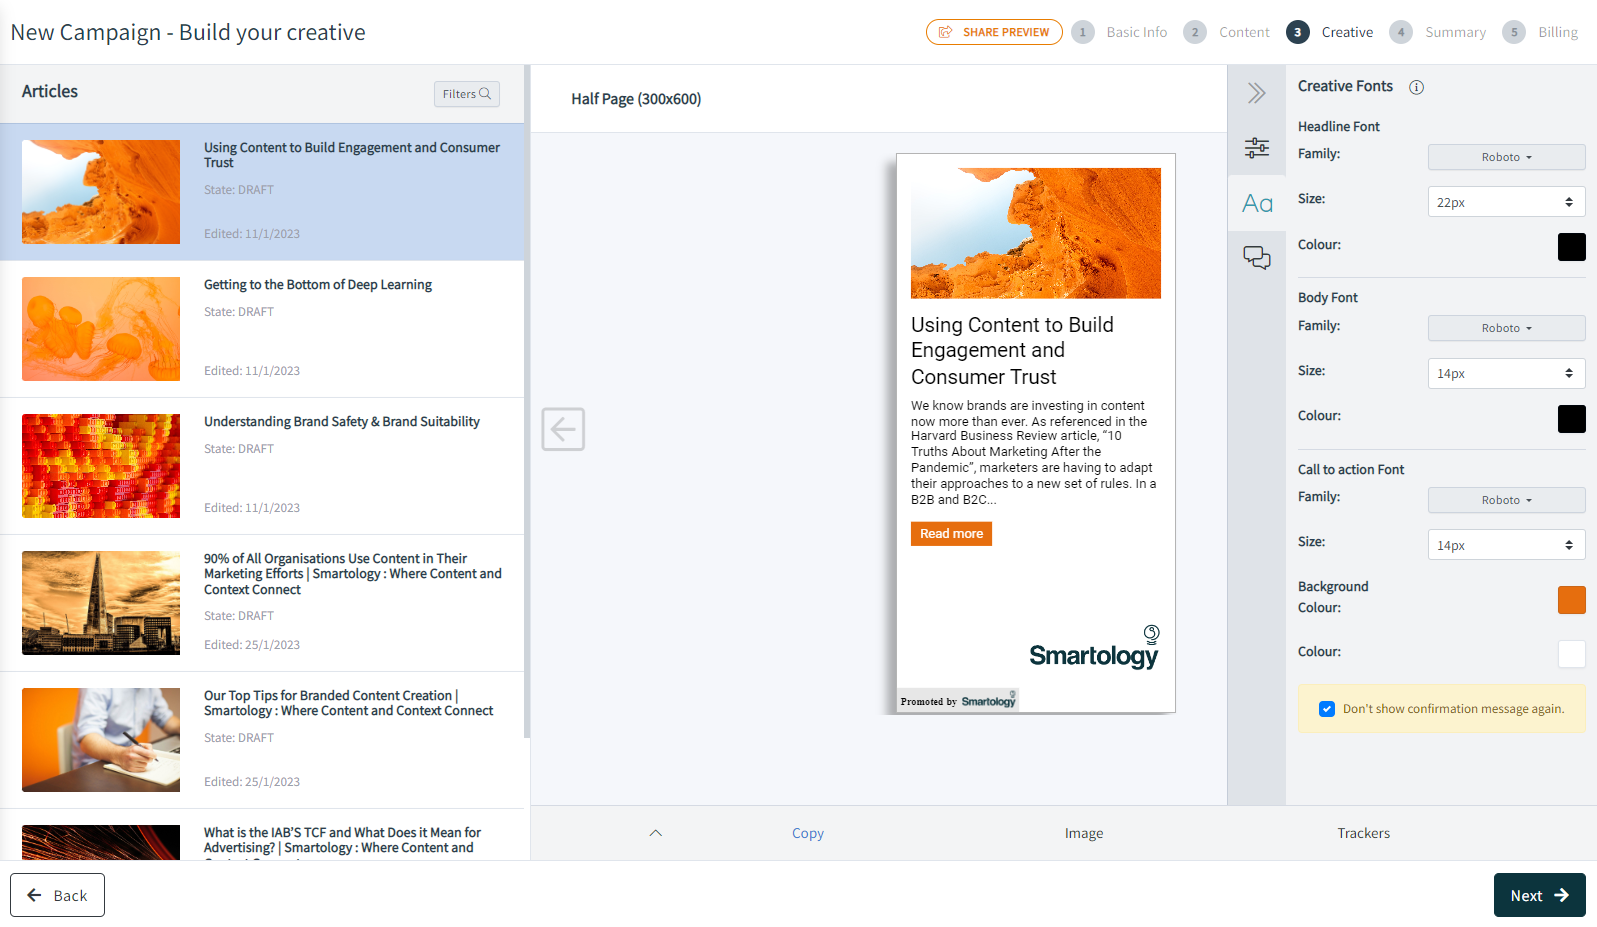 Screenshot of the SmartMatch™ Platform's 'Creative' screen, showing a preview of the dynamic creative.